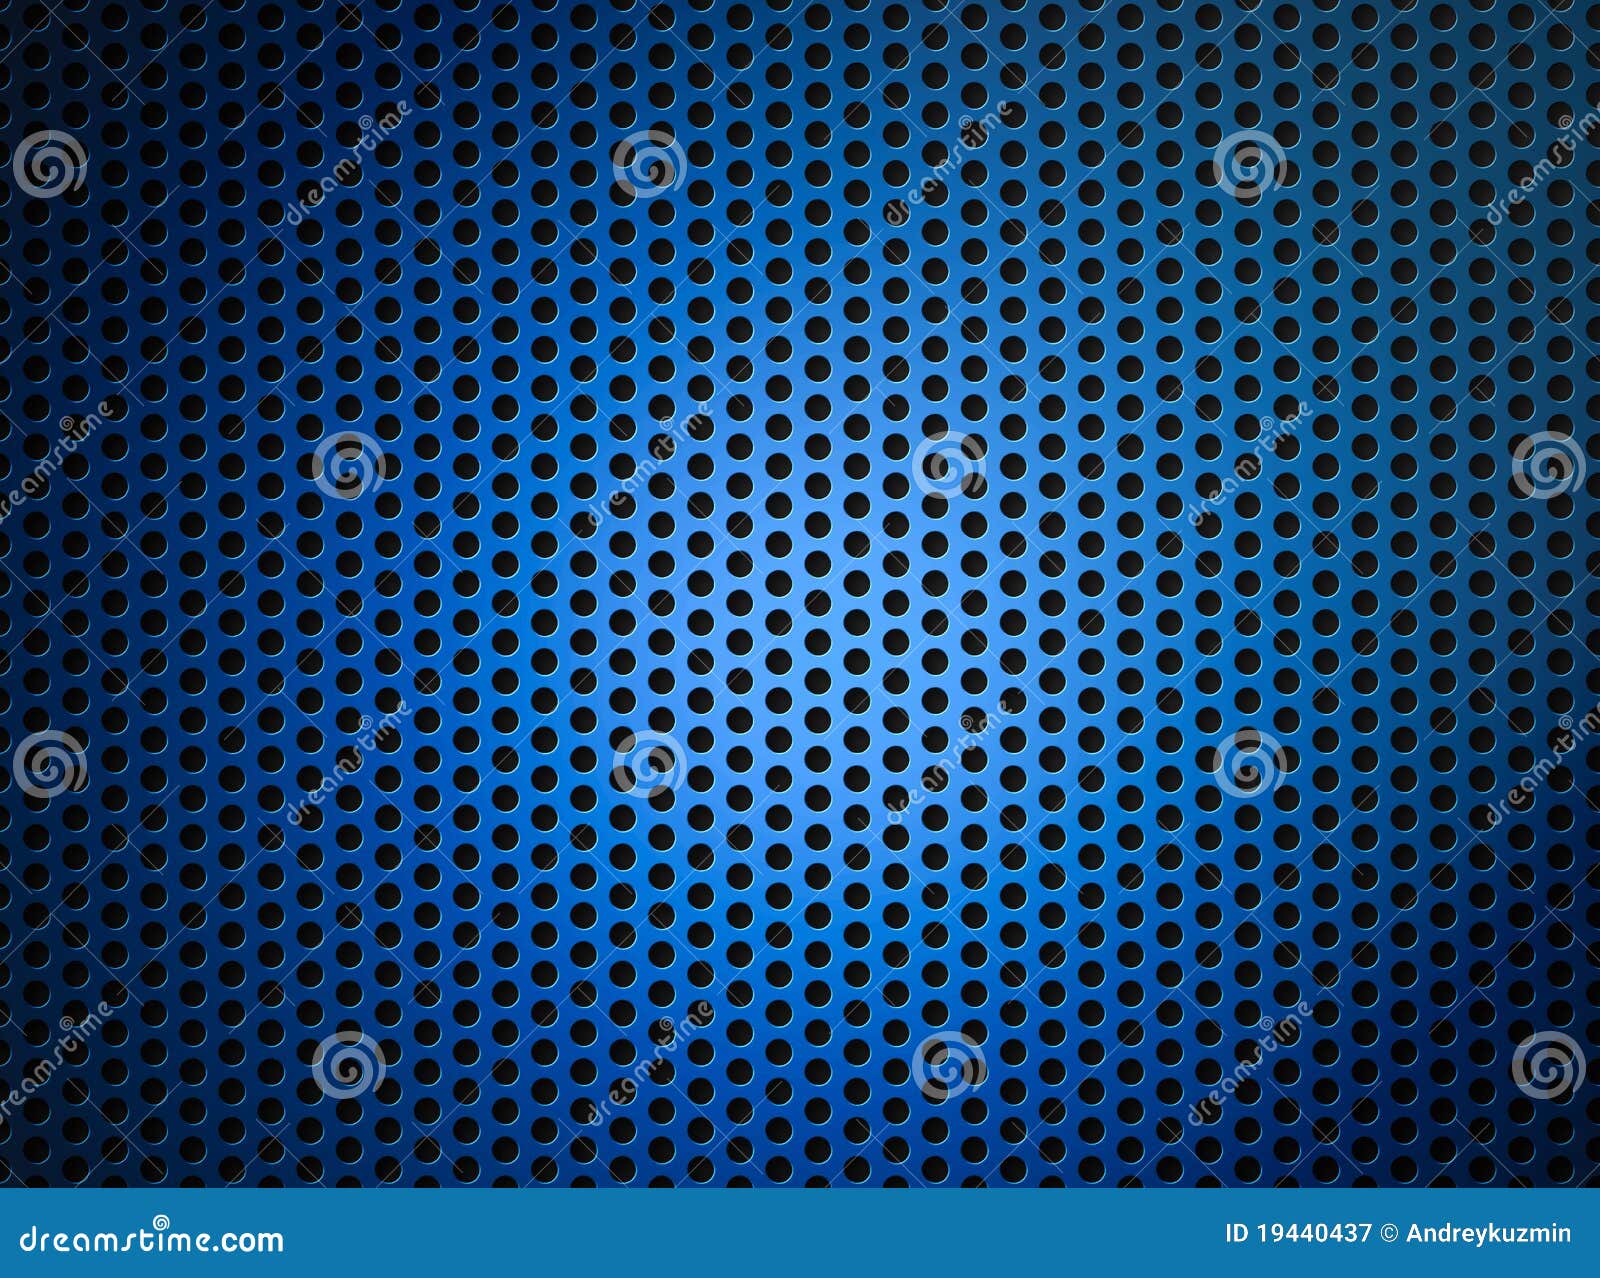 blue metallic grid or grille background